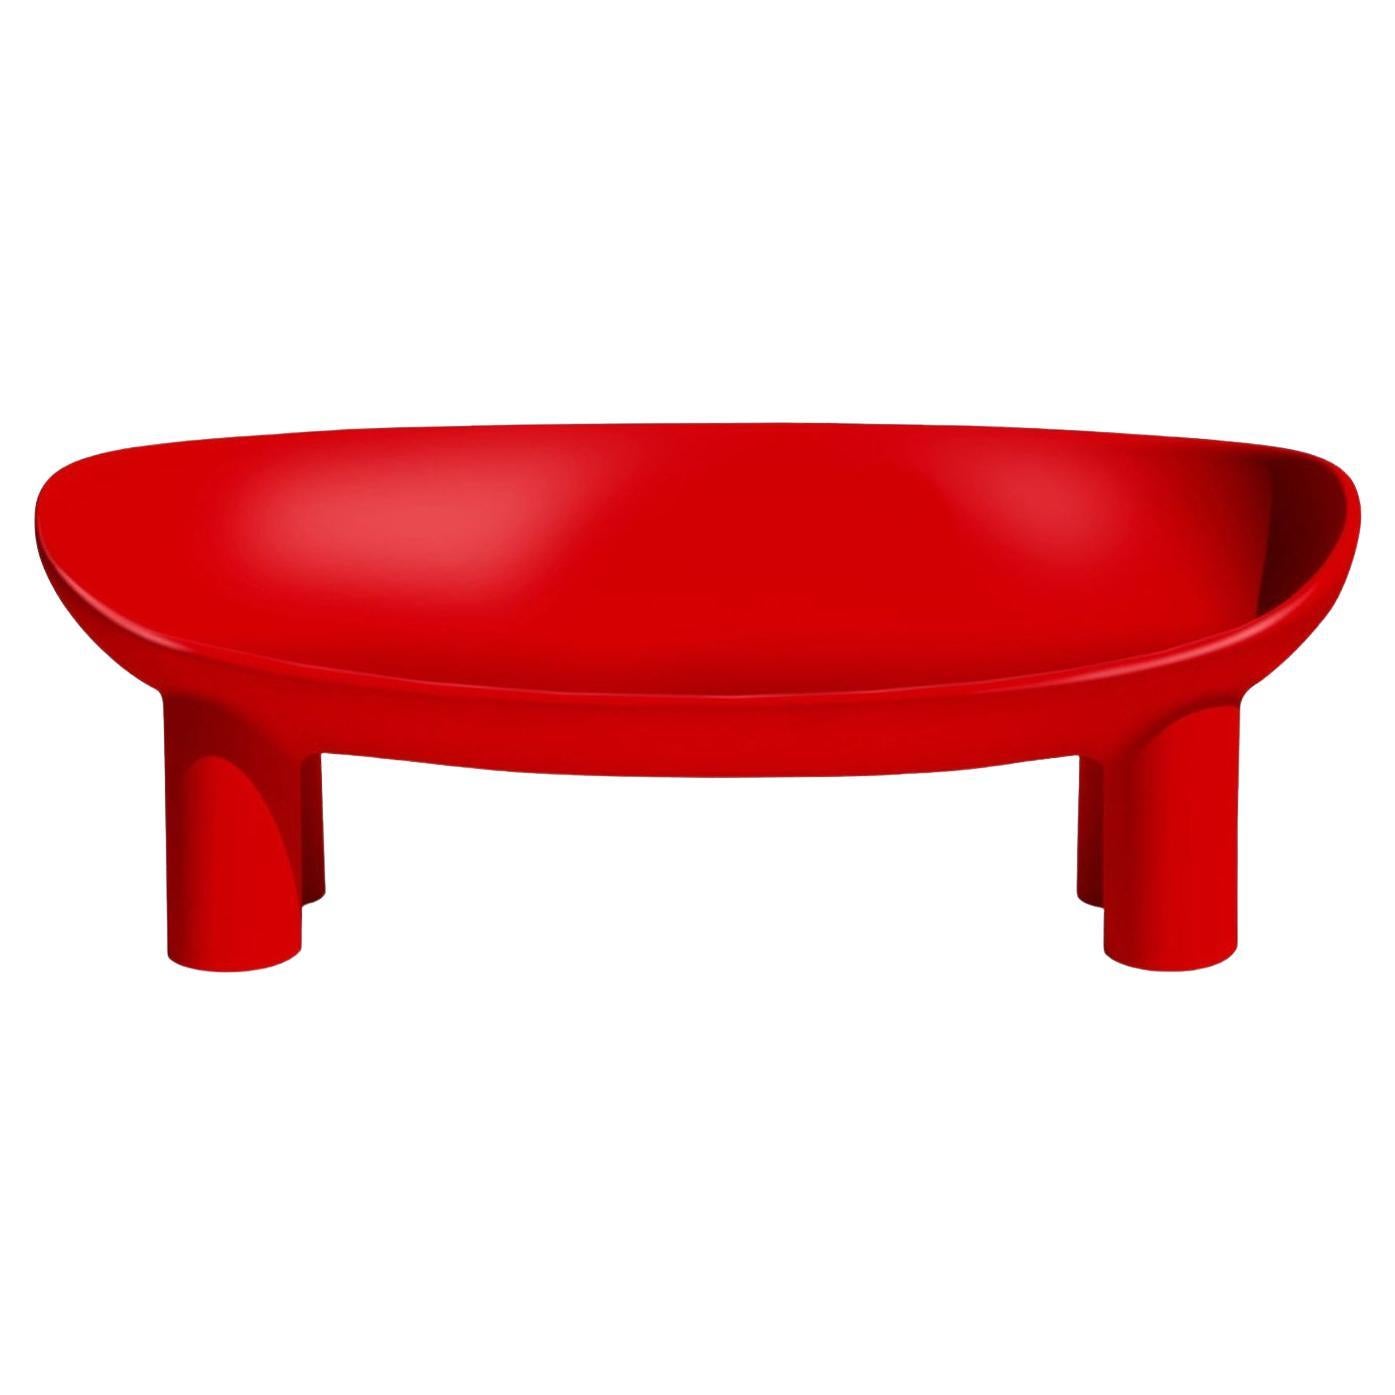 Roly Poly Sofa Red Brick By Driade For Sale